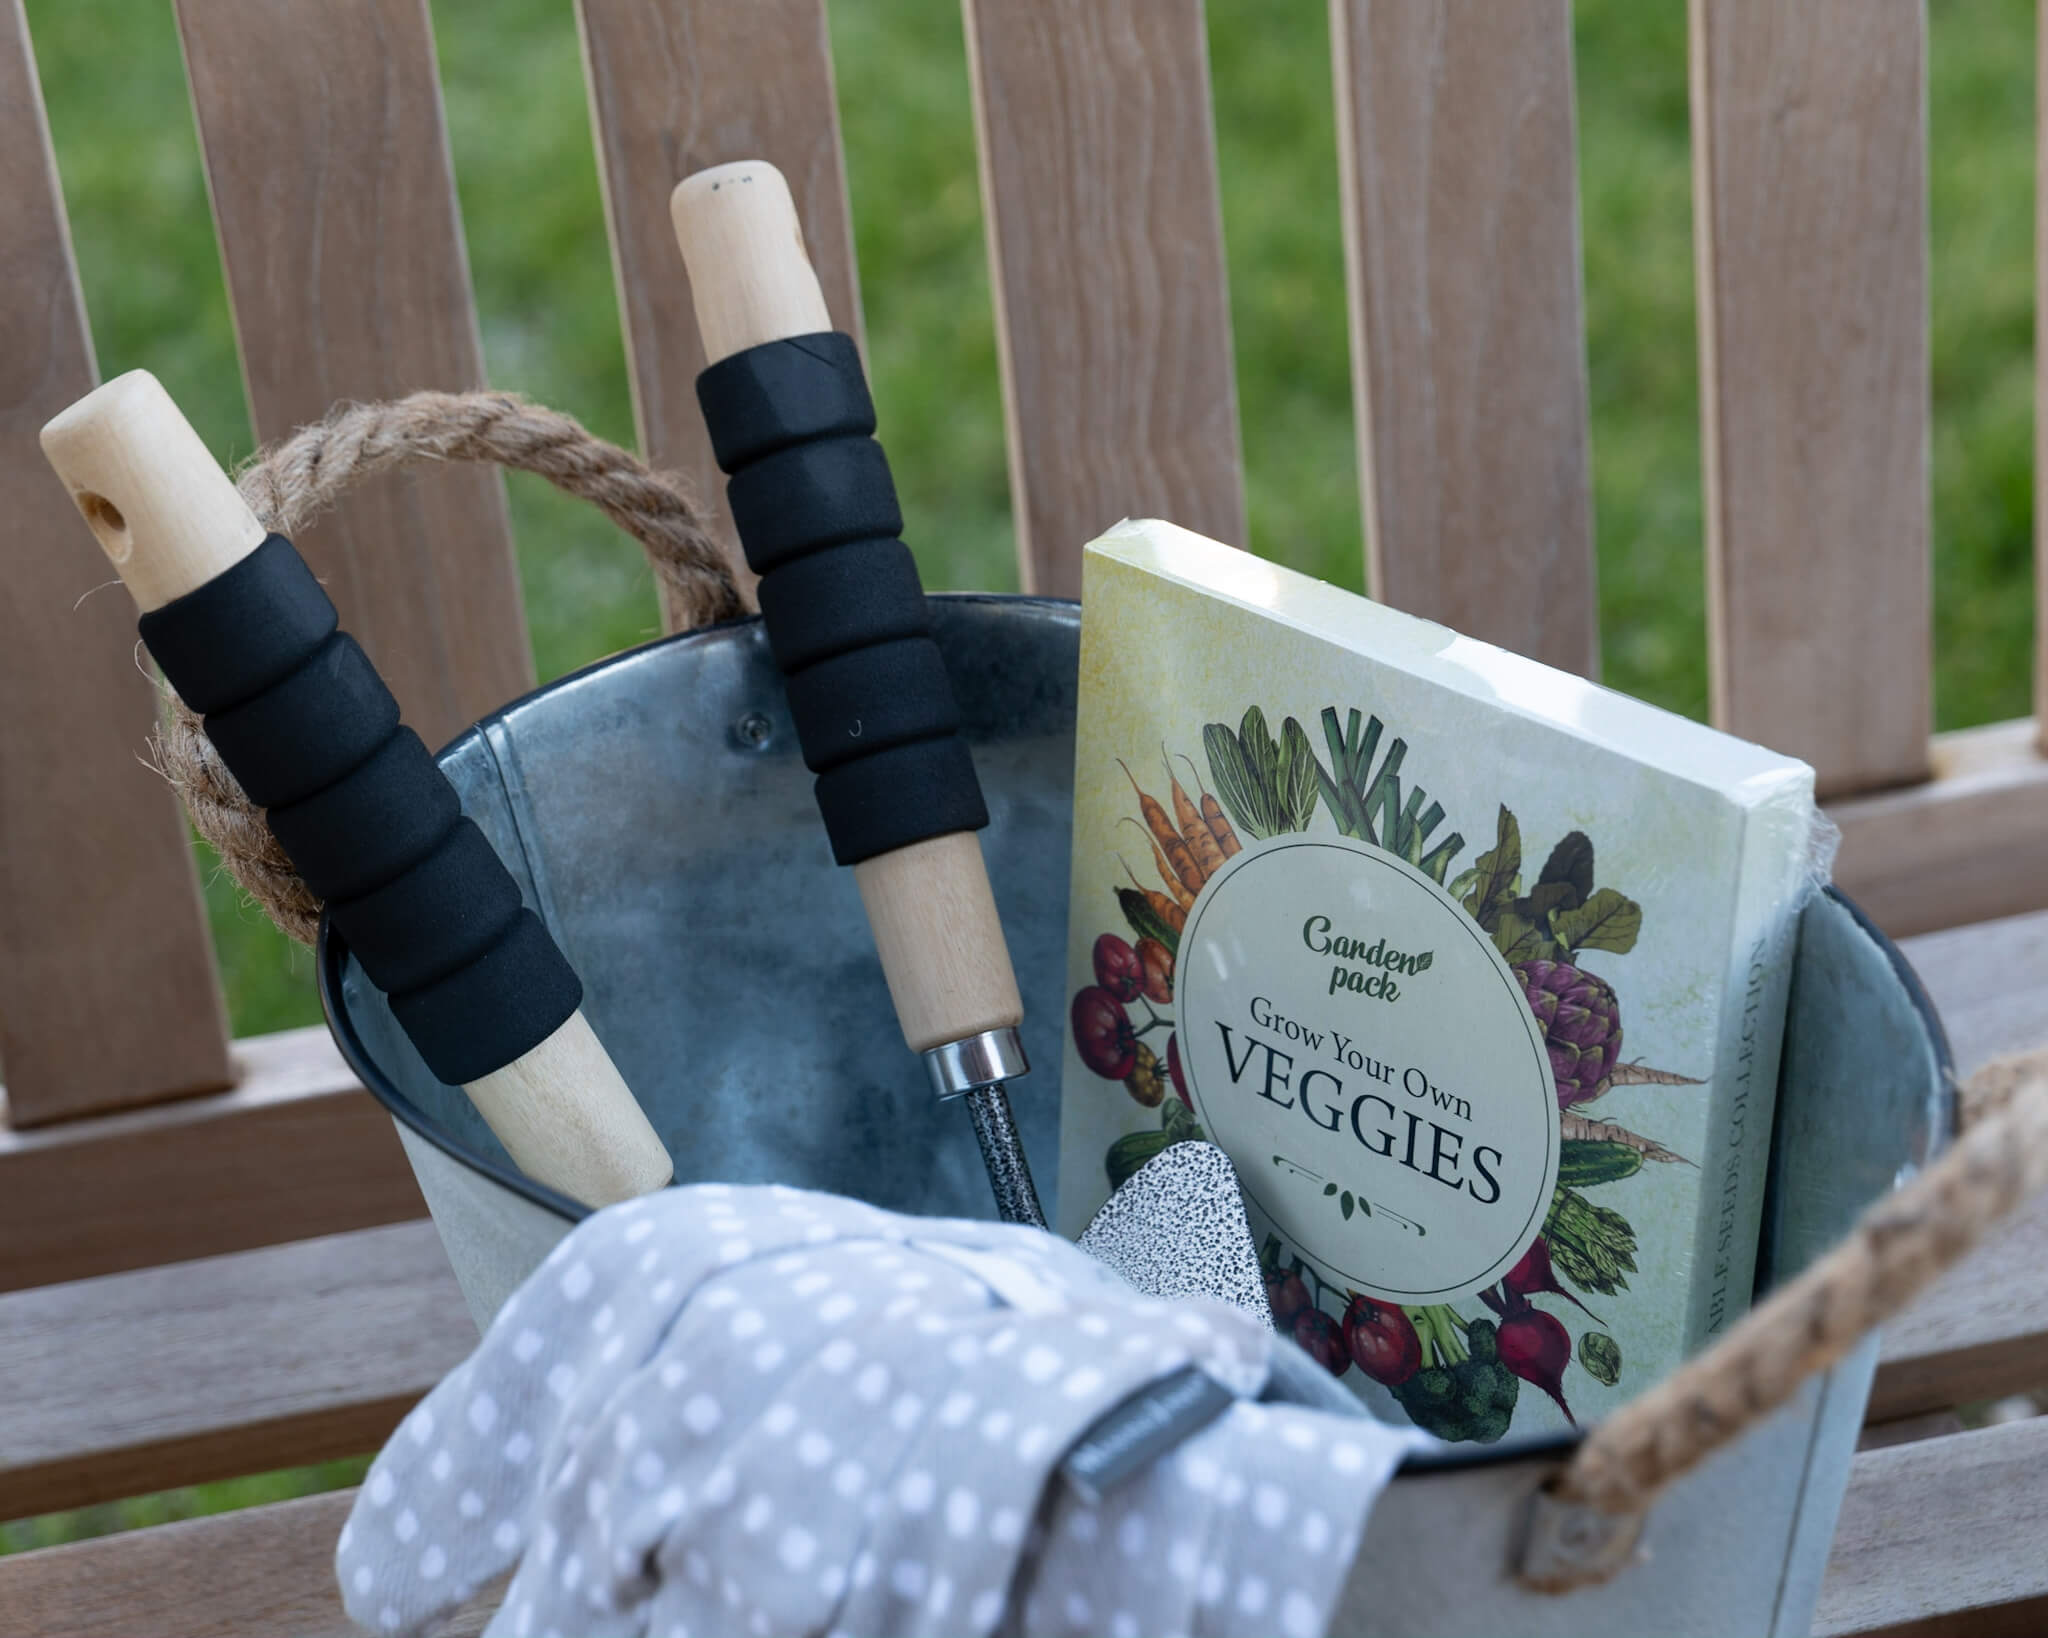 A selection of gardening tools and books